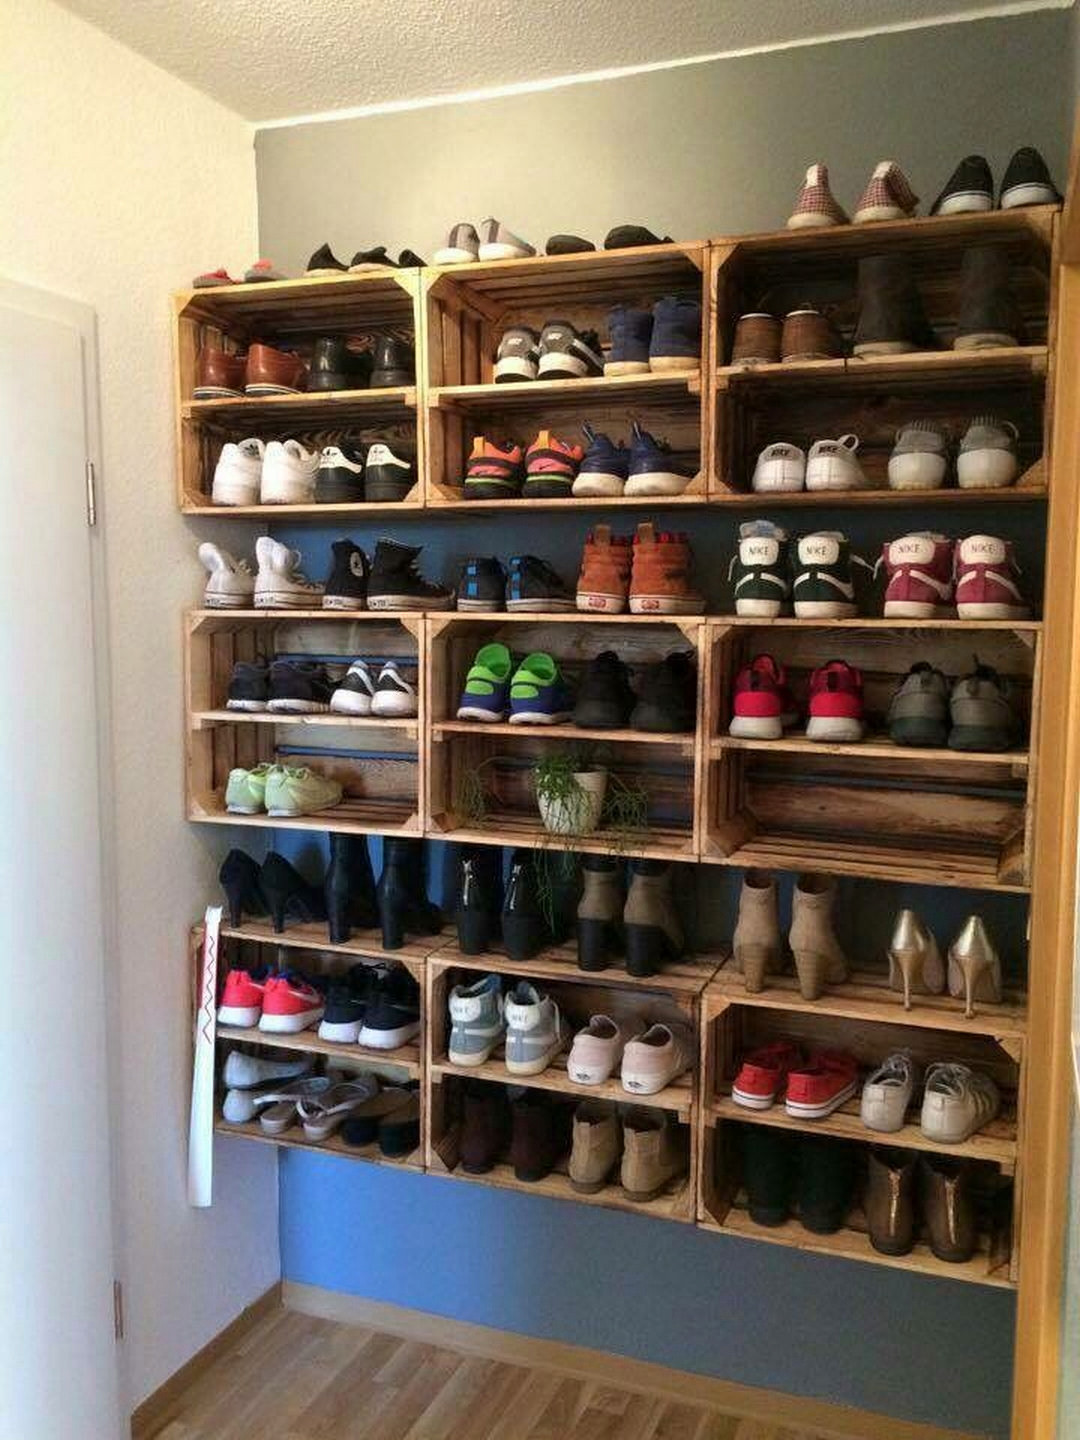 DIY Wall Mounted Shoe Rack
 Practical Shoes Rack Design Ideas for Small Homes